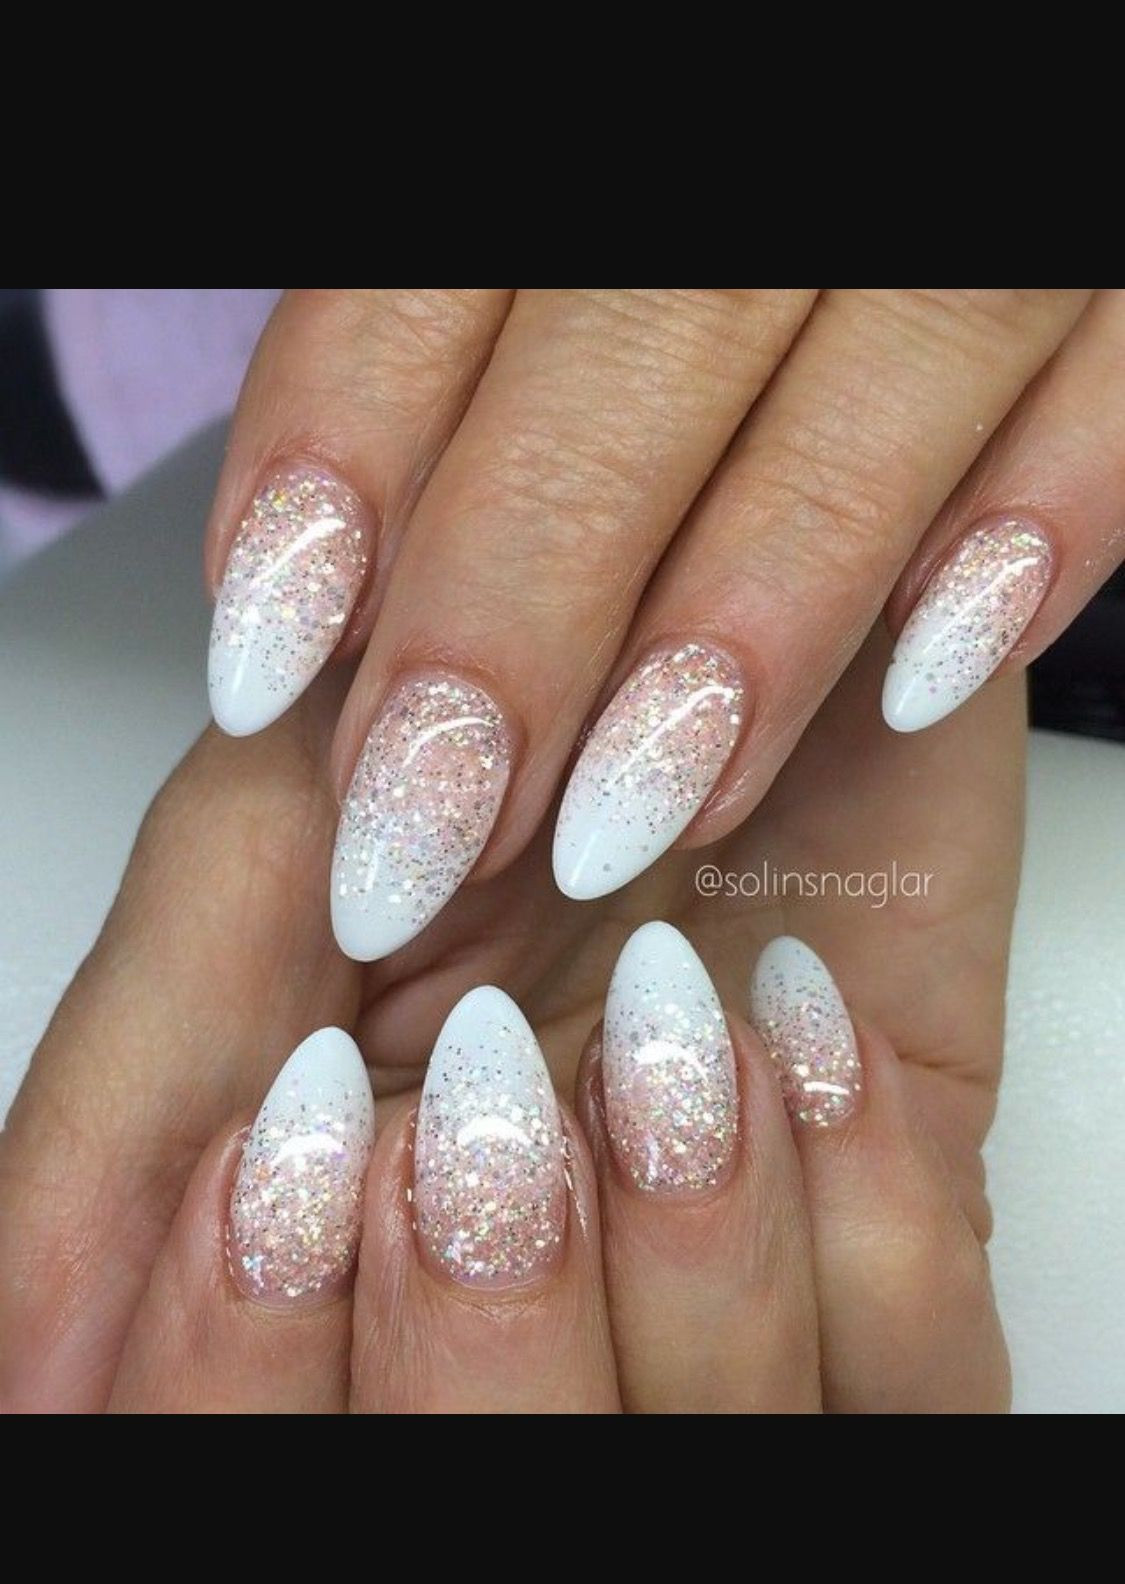 Glitter Almond Nails
 Pin by Elizabeth C on Nails